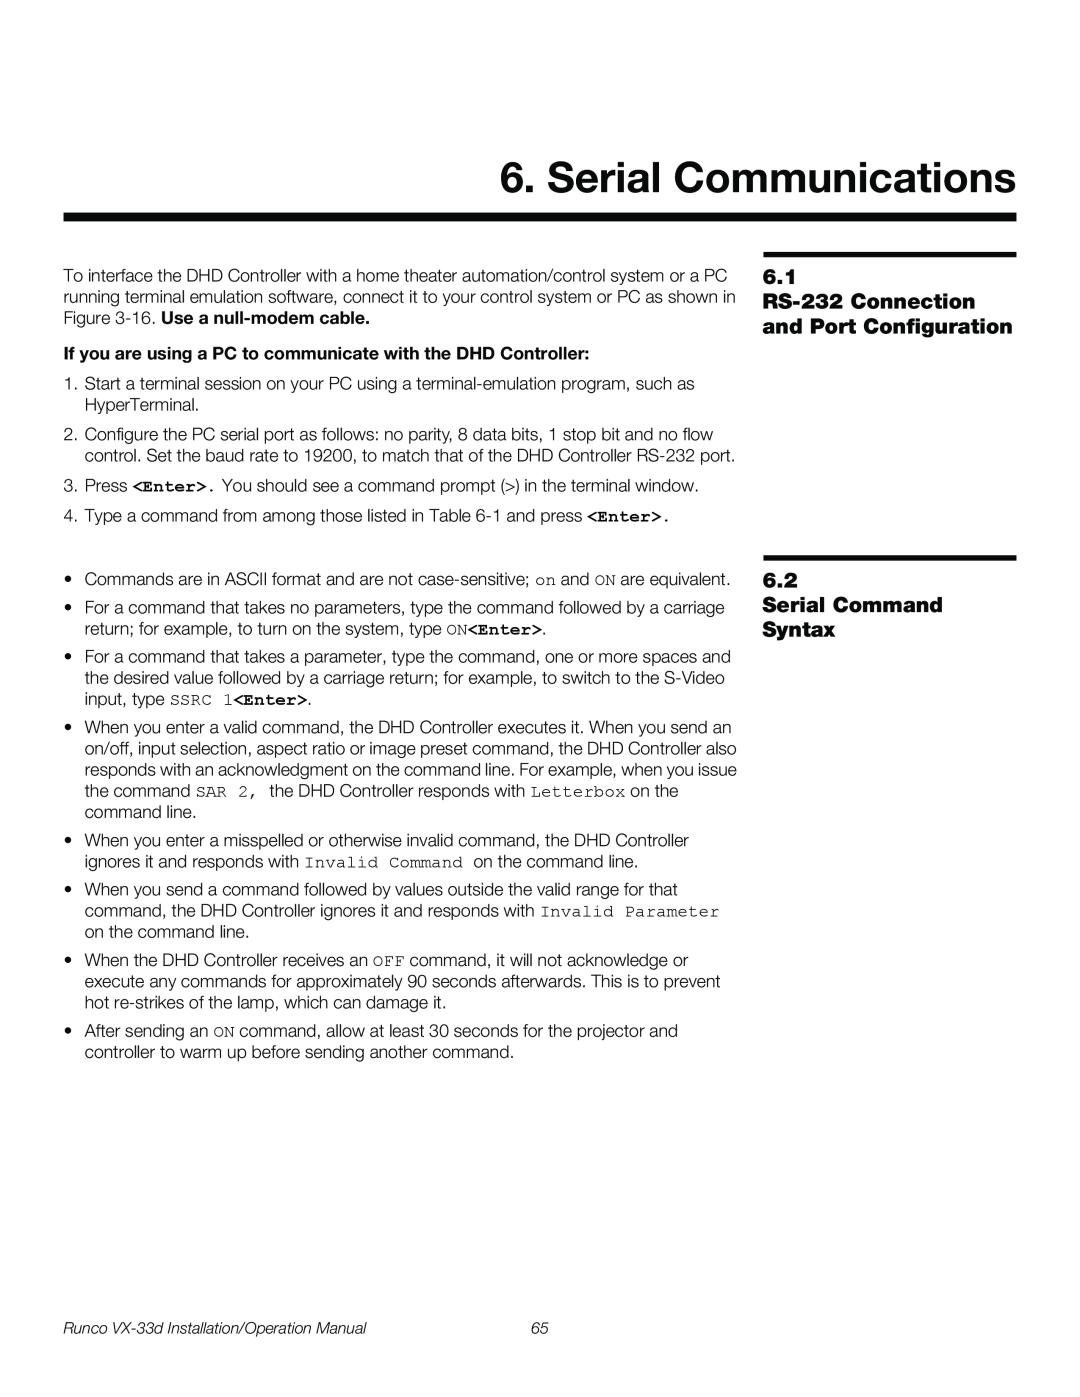 Runco VX-33D Serial Communications, 6.1 RS-232 Connection and Port Configuration 6.2, Serial Command Syntax 